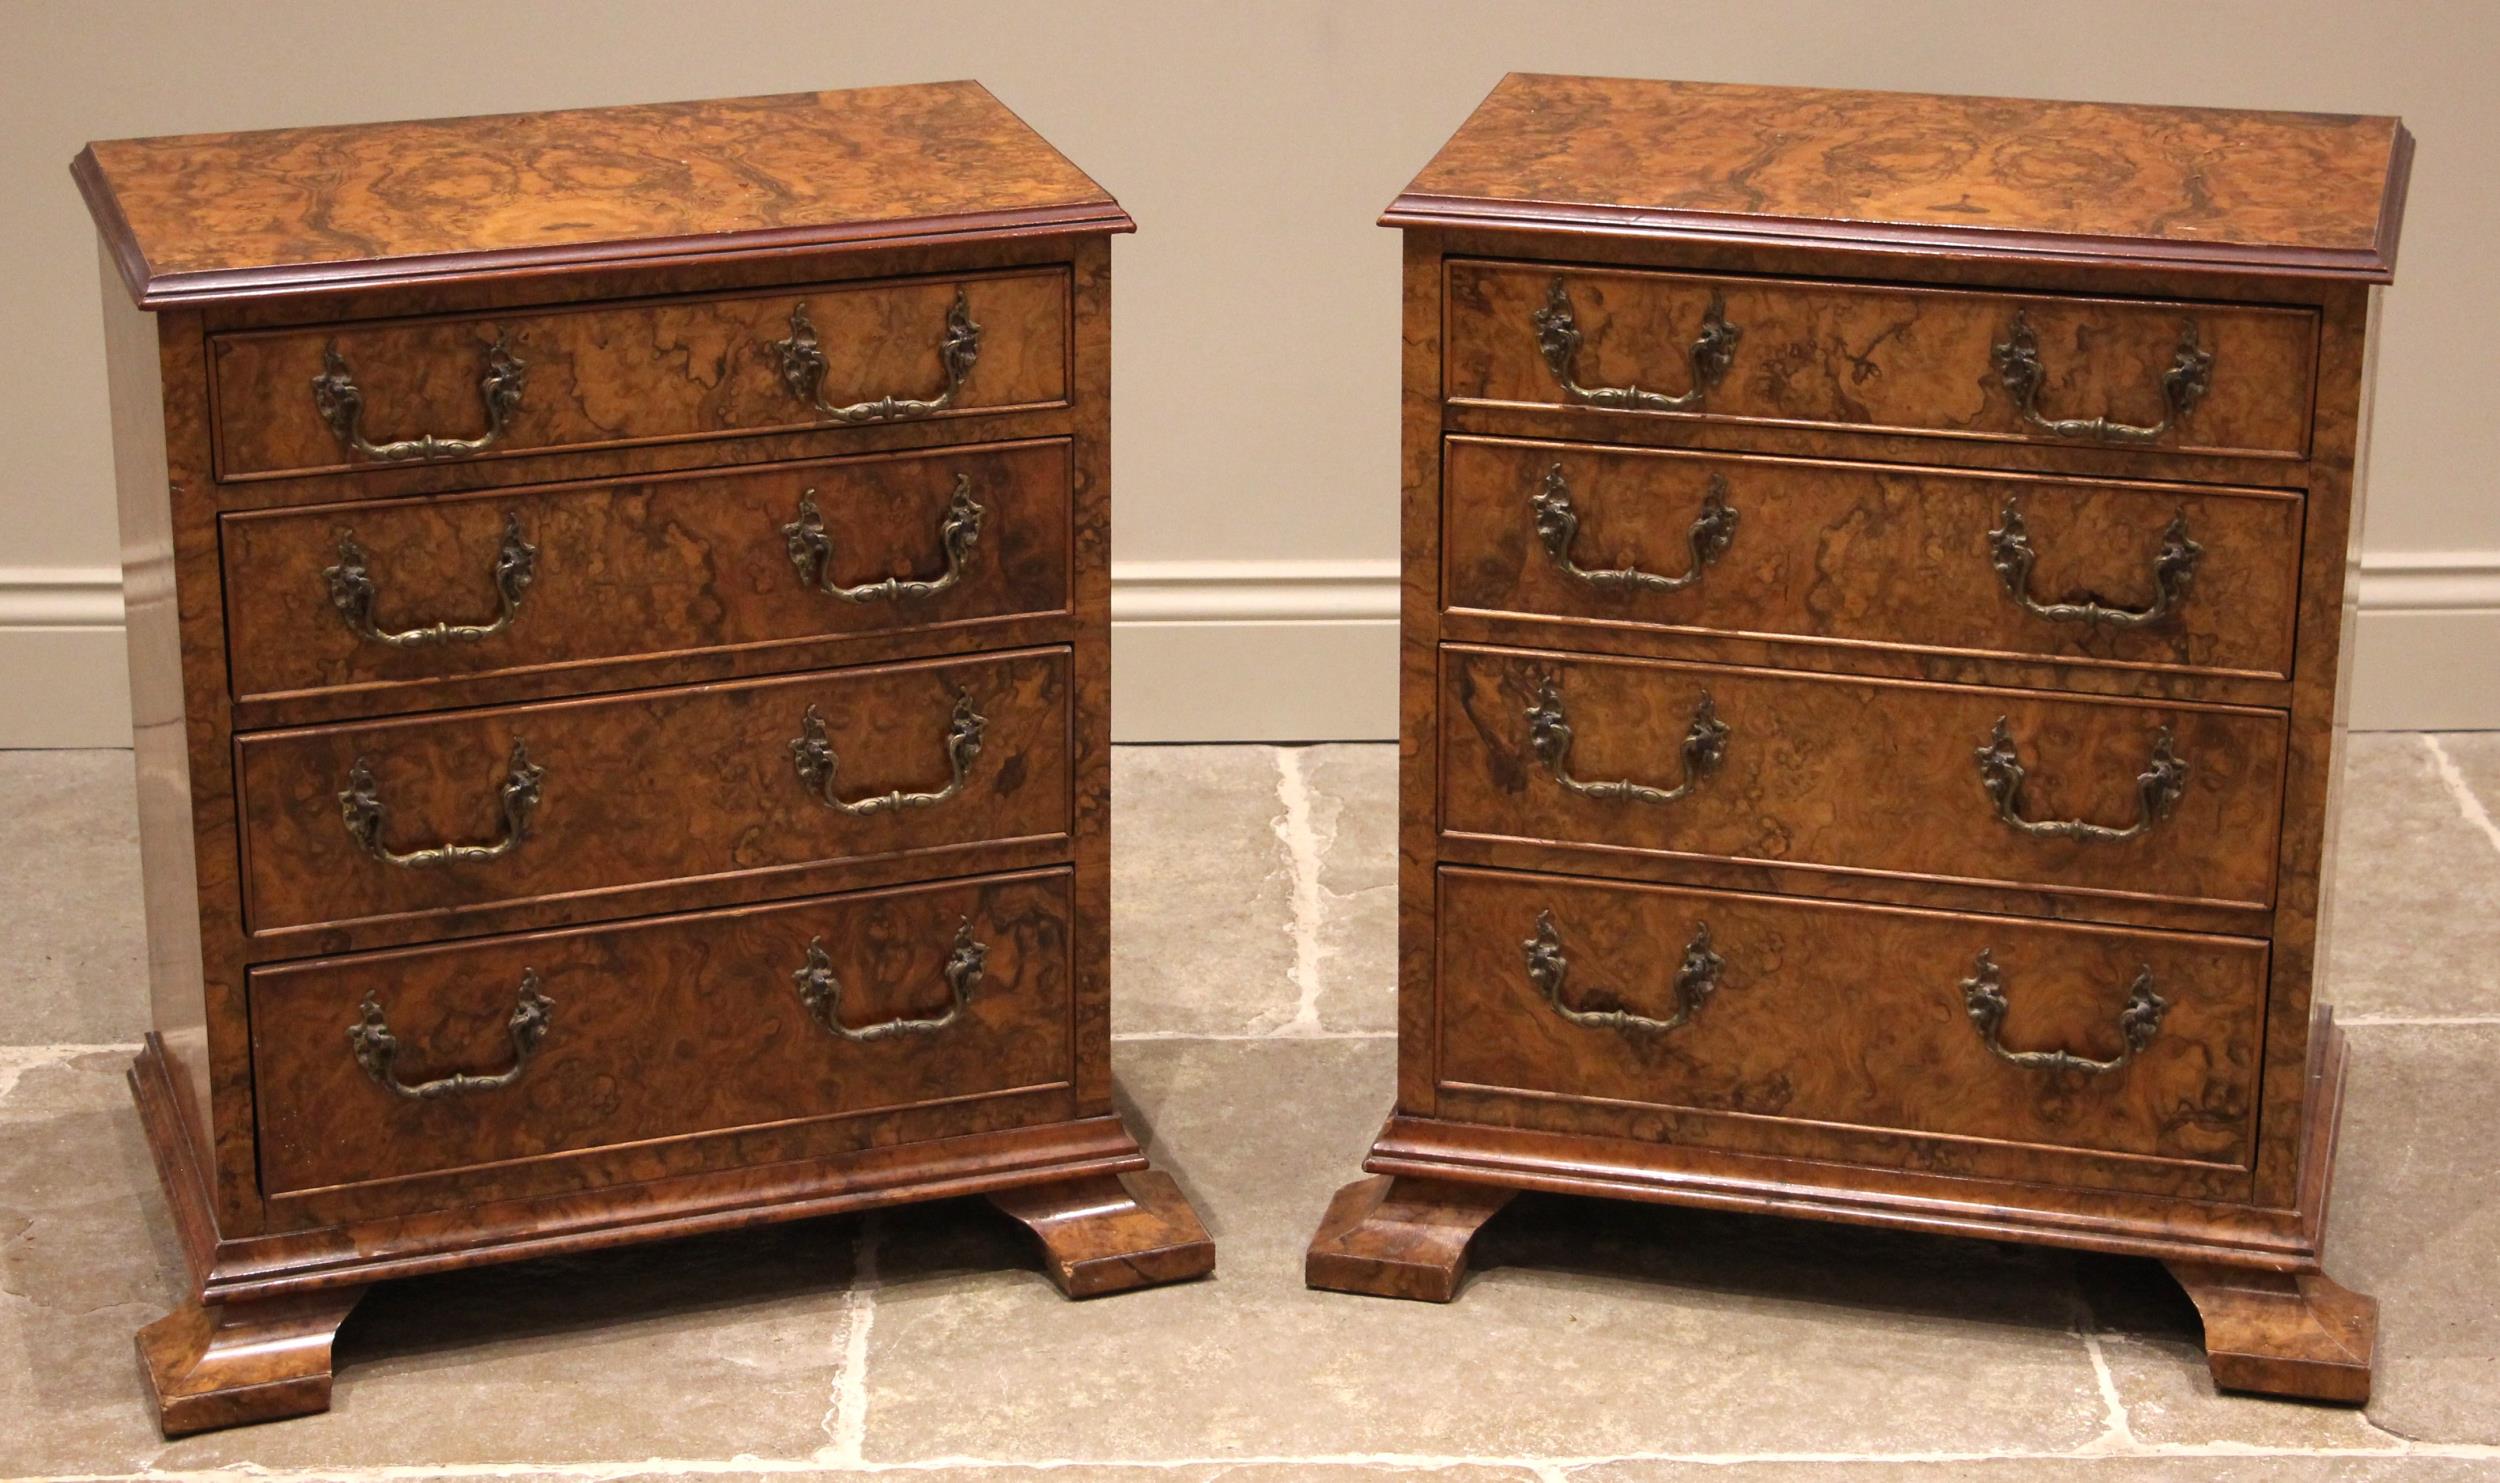 A pair of figured walnut chests, early 20th century and later constructed, each formed with four